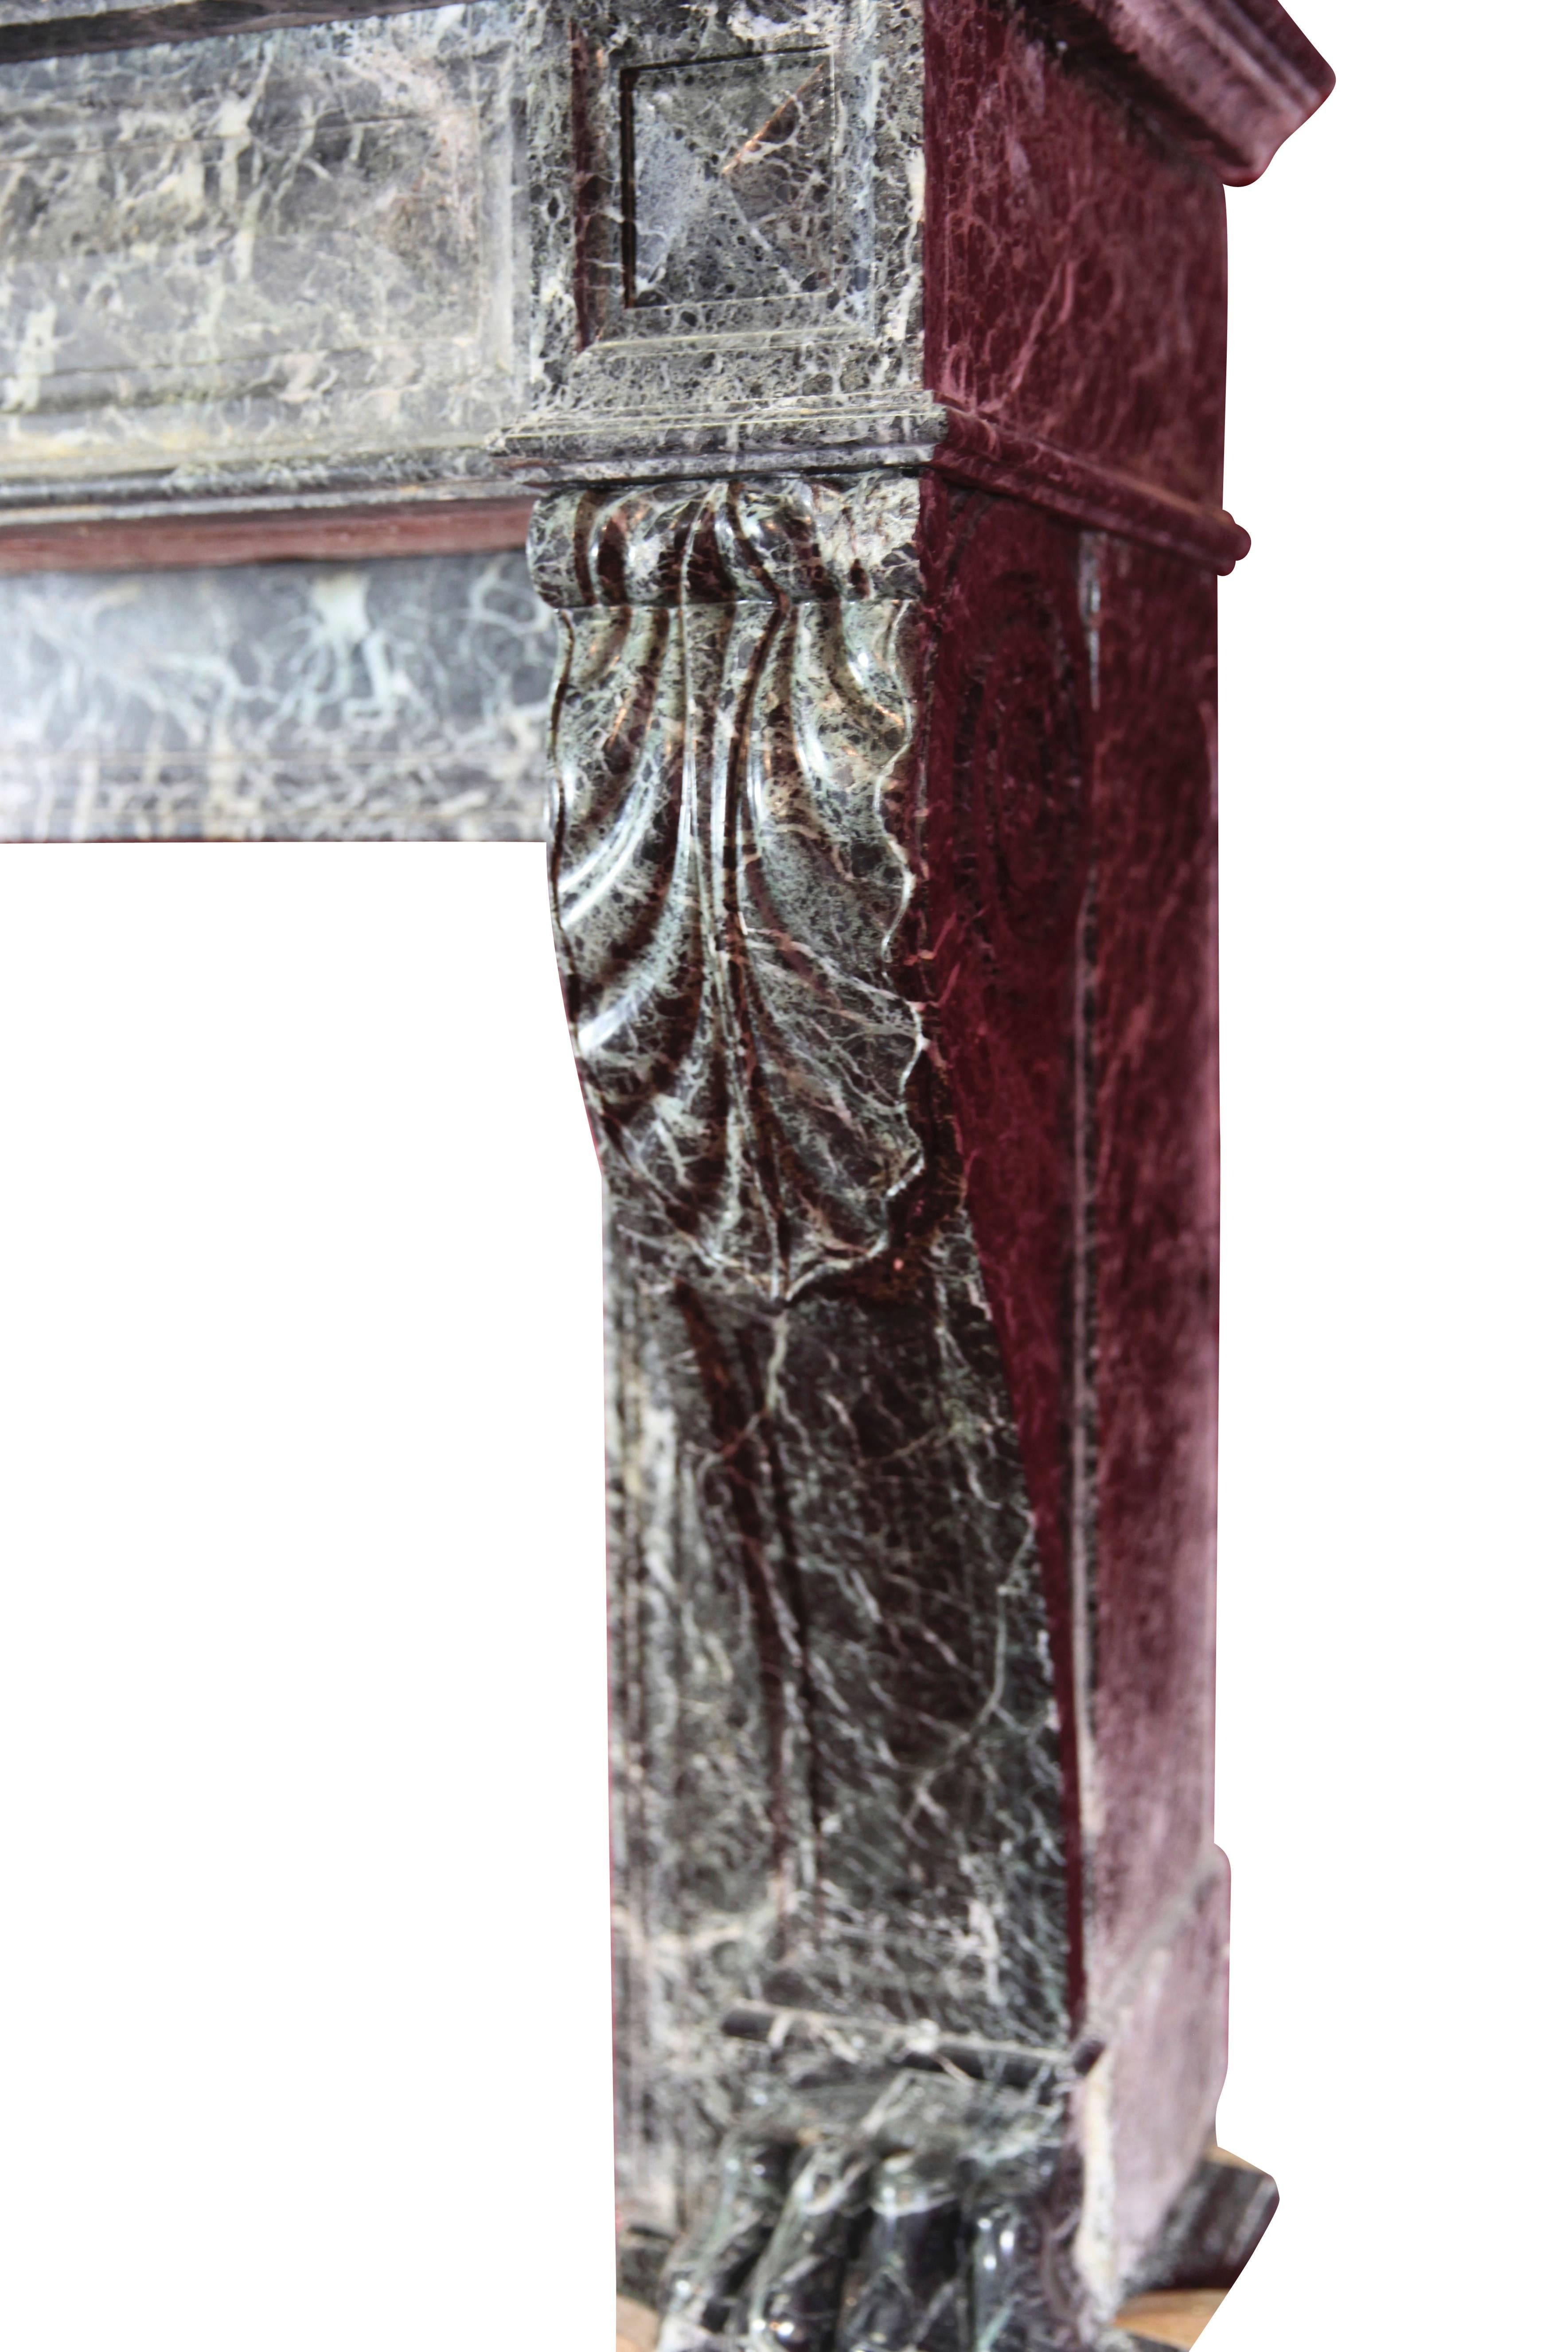 Marble 19th Century Belgian Antique Fireplace Surround For Sale